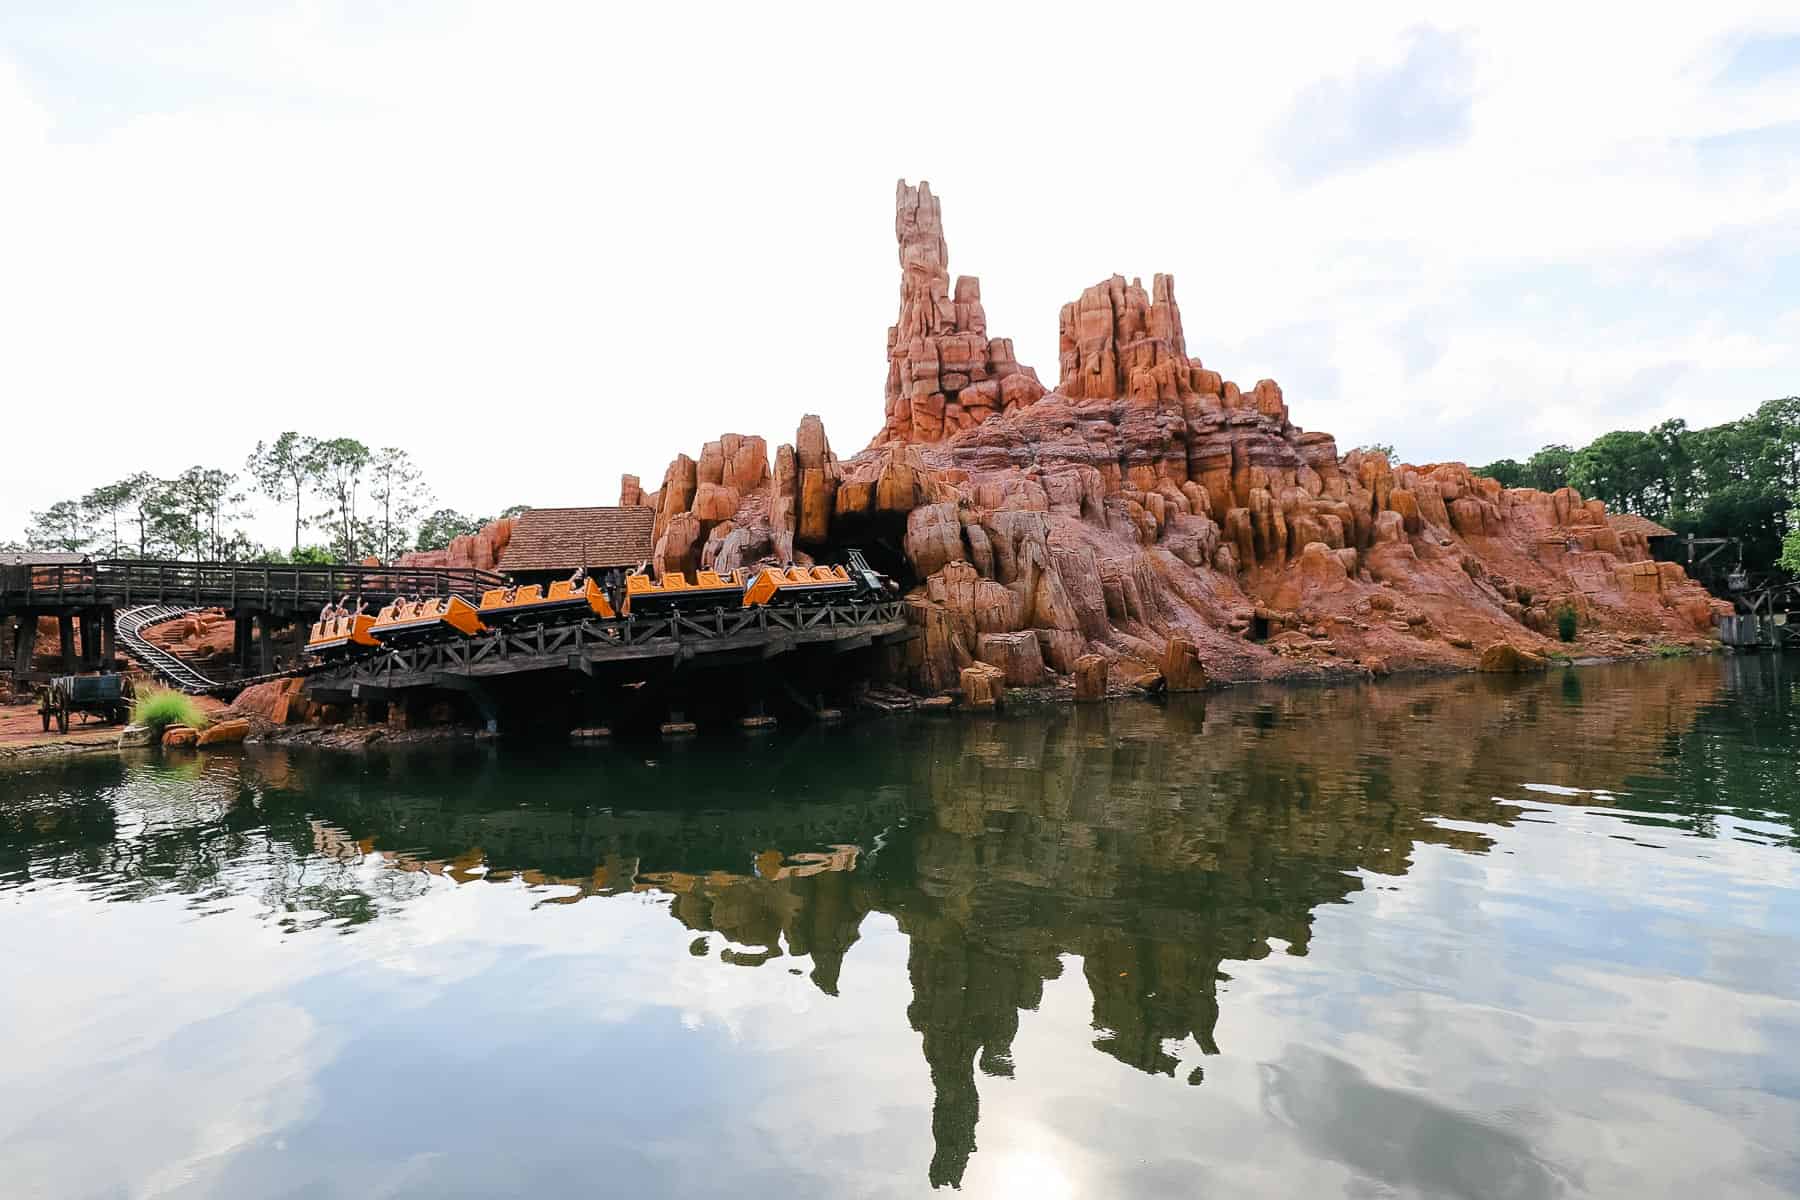 a view of the train coming down the tracks on Big Thunder Mountain Railroad. 